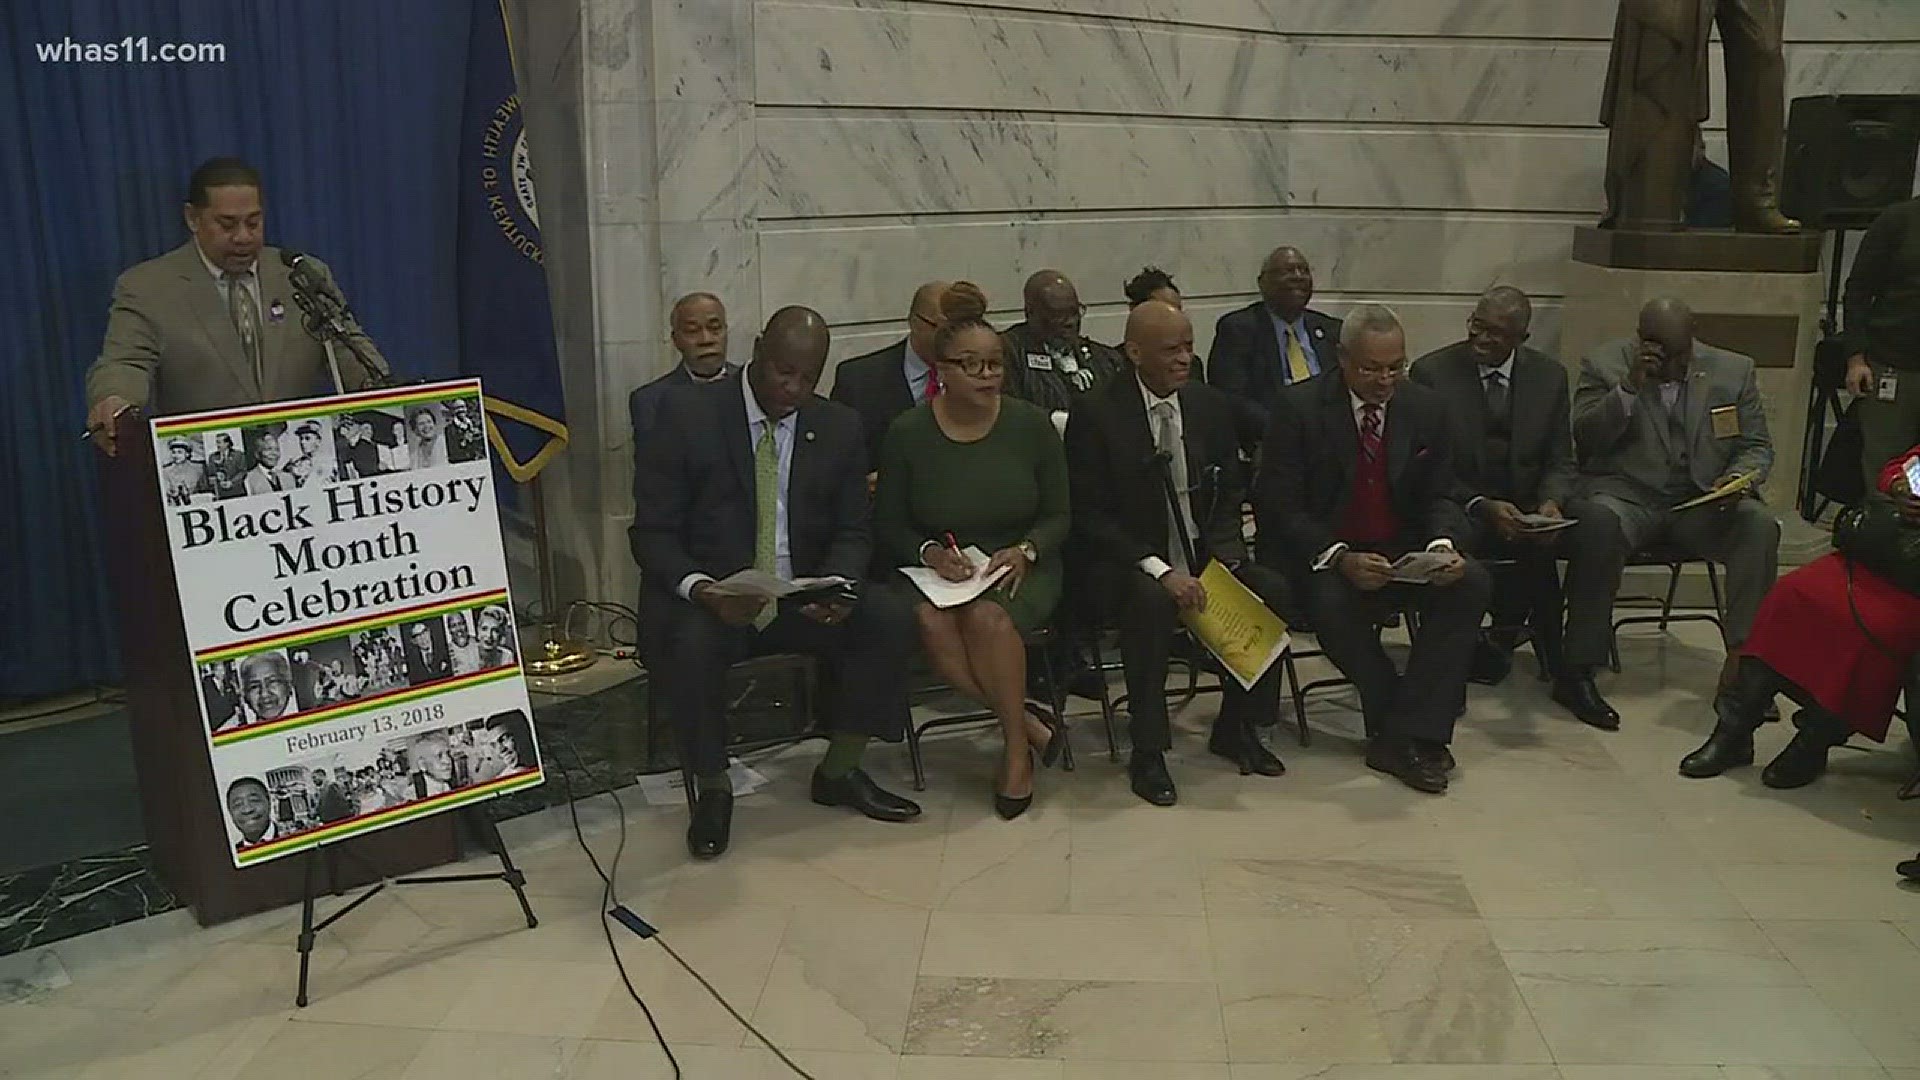 The State Supreme Court Chief Justice announced the sessions will begin this spring, the announcement comes as Frankfort celebrated Black History month.